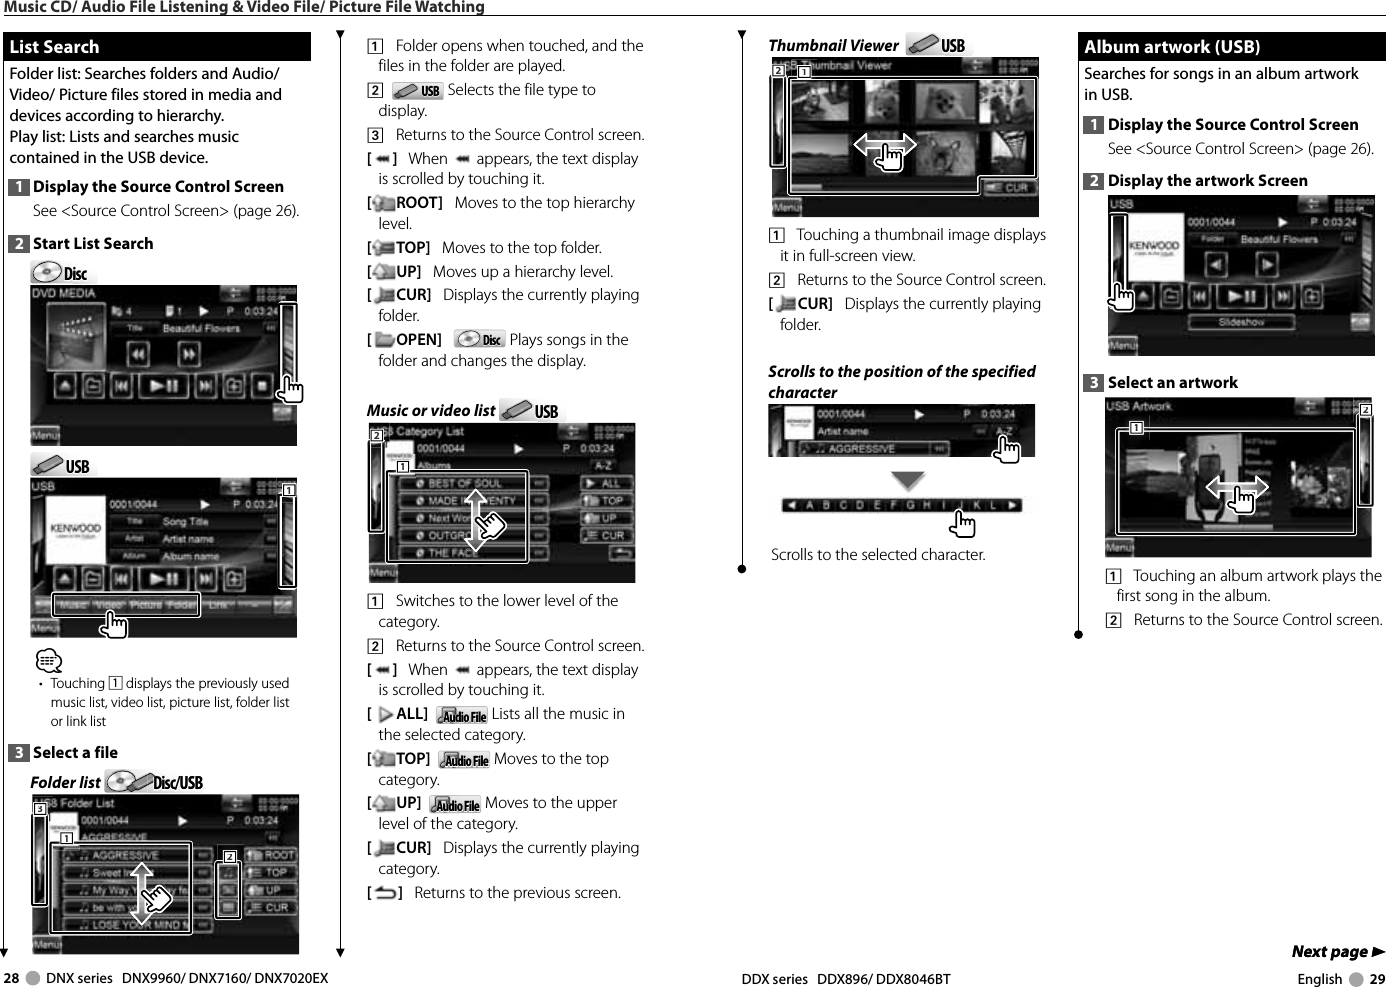 28     DNX series   DNX9960/ DNX7160/ DNX7020EX DDX series   DDX896/ DDX8046BT English     29Next page 3Next page 3Thumbnail Viewer   USBUSB1112221    Touching a thumbnail image displays it in full-screen view.2    Returns to the Source Control screen.[CUR]   Displays the currently playing folder.Scrolls to the position of the specified characterScrolls to the selected character. List Search List  SearchFolder list: Searches folders and Audio/ Video/ Picture files stored in media and devices according to hierarchy.Play list: Lists and searches music contained in the USB device.1  Display the Source Control ScreenSee &lt;Source Control Screen&gt; (page 26). 2  Start List SearchDiscDiscUSBUSB111⁄• Touching 1 displays the previously used music list, video list, picture list, folder list or link list3  Select a fileFolder list  Disc/USBDisc/USB1112223331    Folder opens when touched, and the files in the folder are played.2    USBUSB  Selects the file type to display.3    Returns to the Source Control screen.[]   When   appears, the text display is scrolled by touching it.[ROOT]   Moves to the top hierarchy level.[TOP]   Moves to the top folder.[UP]   Moves up a hierarchy level.[CUR]   Displays the currently playing folder.[OPEN]   DiscDisc  Plays songs in the folder and changes the display.Music or video list  USBUSB1112221    Switches to the lower level of the category.2    Returns to the Source Control screen.[]   When   appears, the text display is scrolled by touching it.[ALL]   Audio FileAudio File  Lists all the music in the selected category.[TOP]   Audio FileAudio File  Moves to the top category.[UP]   Audio FileAudio File  Moves to the upper level of the category.[CUR]   Displays the currently playing category.[]   Returns to the previous screen. Album artwork (USB) Album artwork (USB)Searches for songs in an album artwork in USB.1  Display the Source Control ScreenSee &lt;Source Control Screen&gt; (page 26). 2  Display the artwork Screen3  Select an artwork2221111    Touching an album artwork plays the first song in the album.2    Returns to the Source Control screen.Music CD/ Audio File Listening &amp; Video File/ Picture File Watching